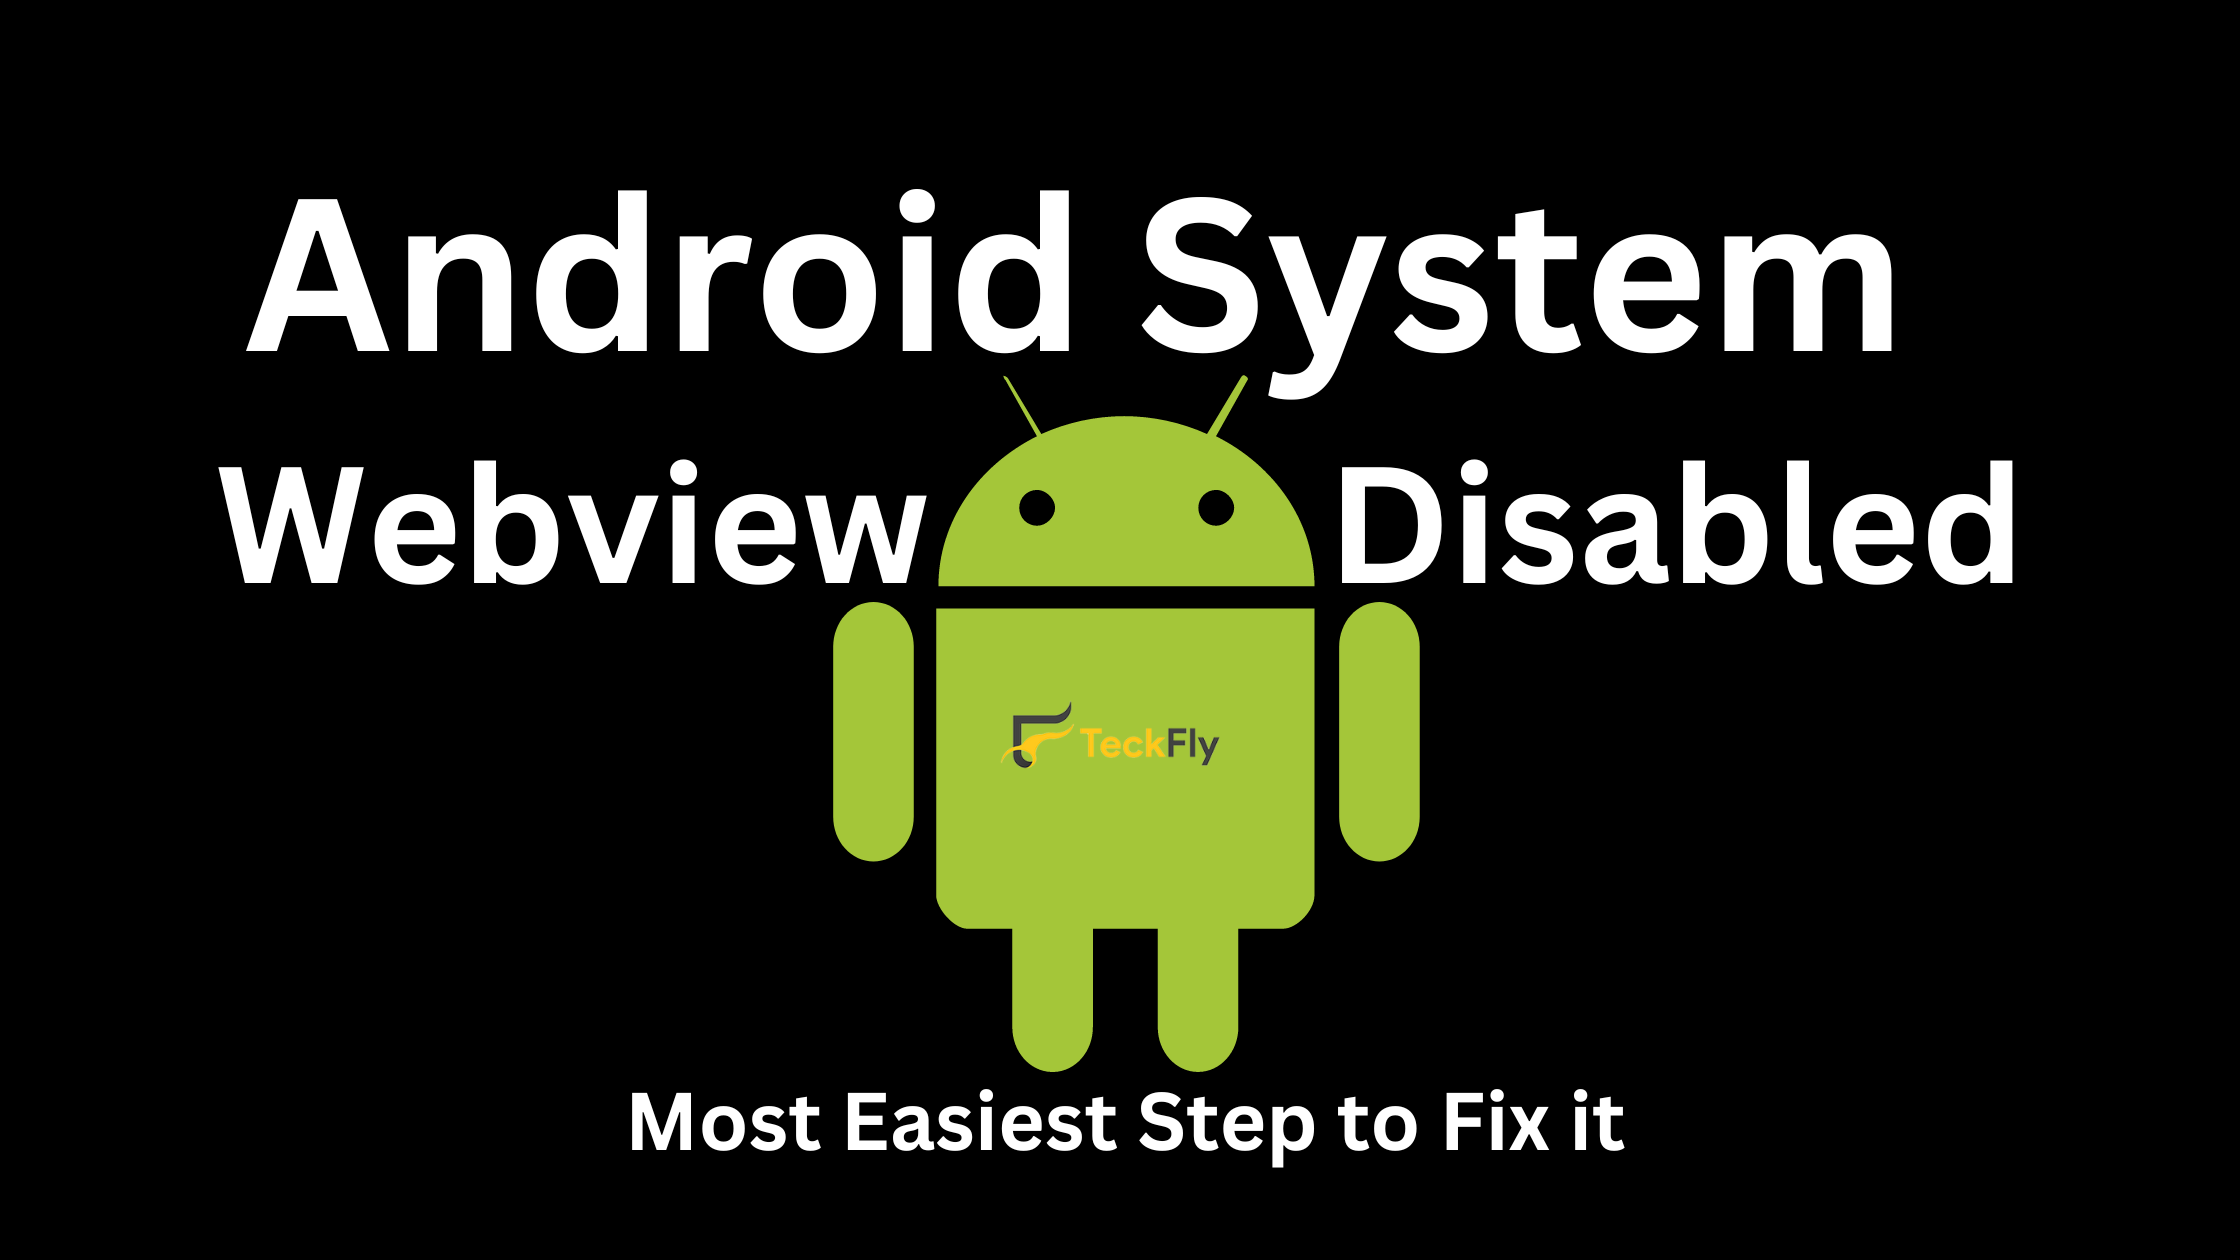 Android System Webview Disabled - Most Easiest Step to Fix it